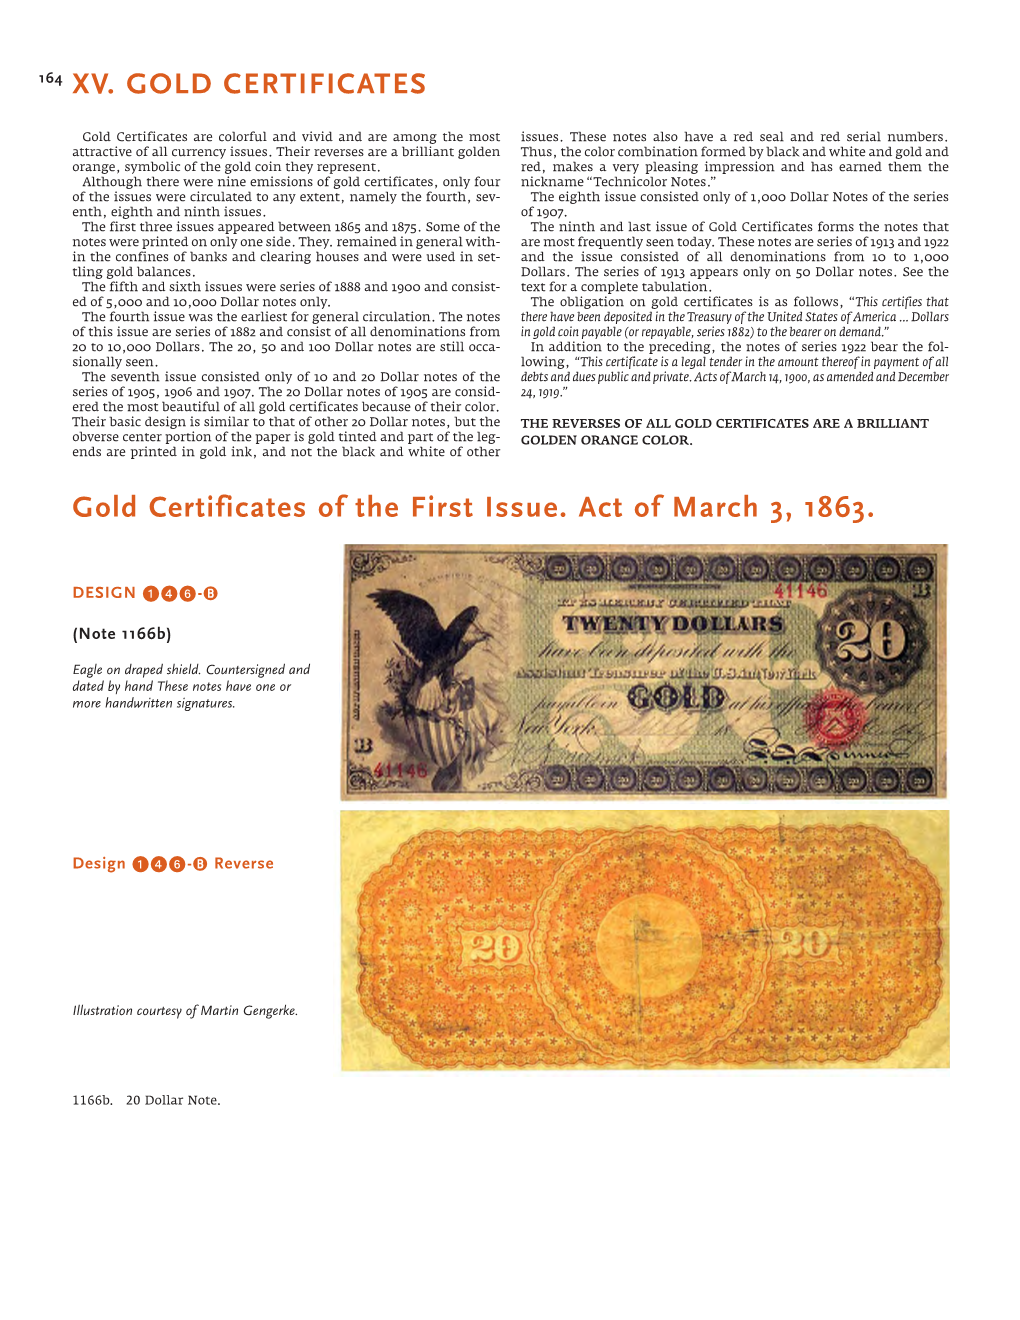 Gold Certificates of the Fourth and Later Issues. 10 Dollar Notes